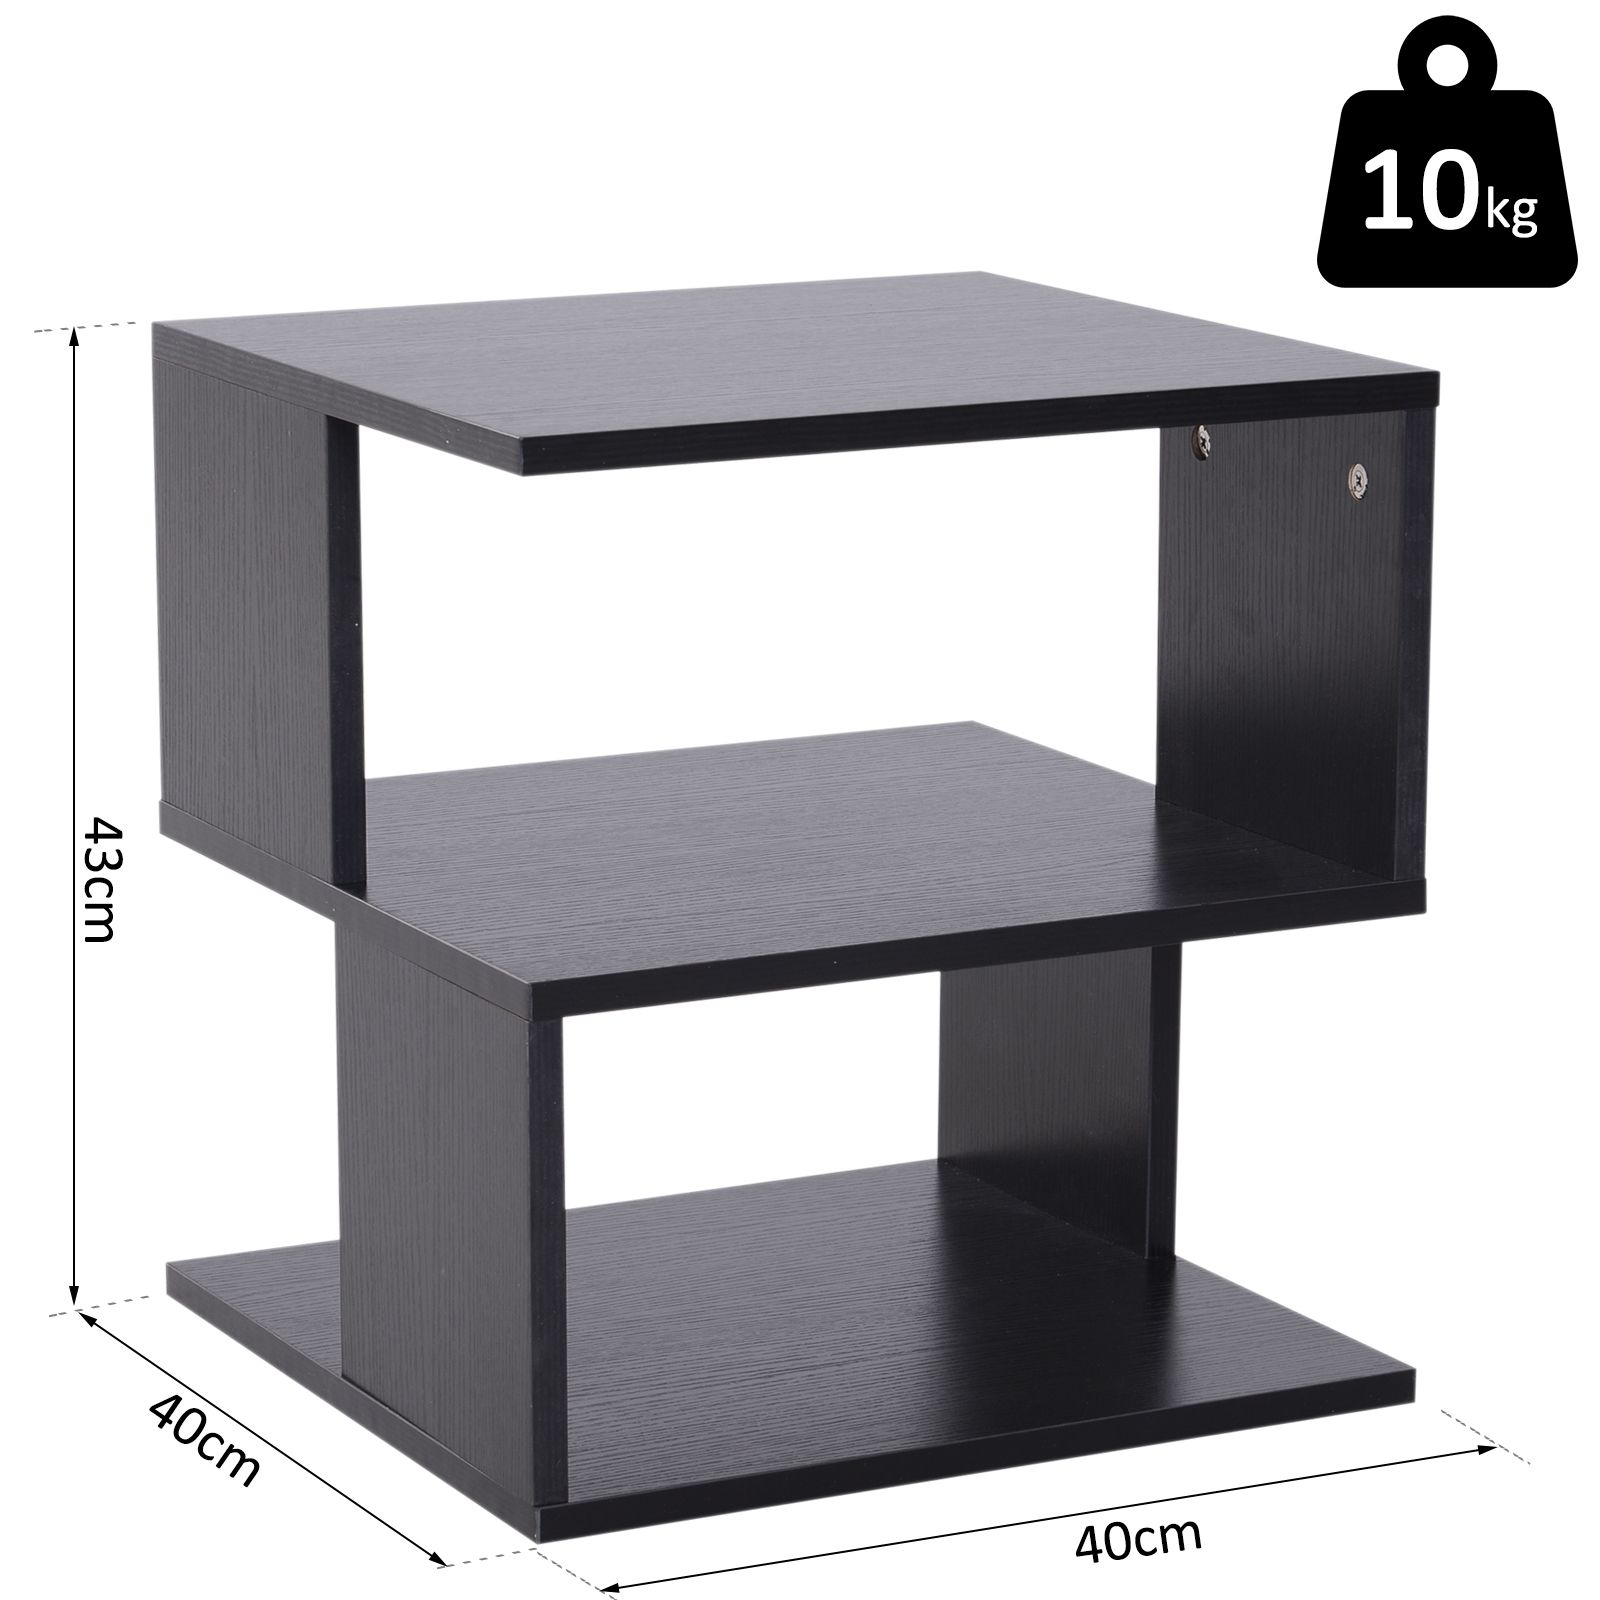 Modern Square 2 Tier Wood Coffee Side Table Storage Shelf Rack Living Pertaining To Wood Coffee Tables With 2 Tier Storage (Gallery 5 of 20)